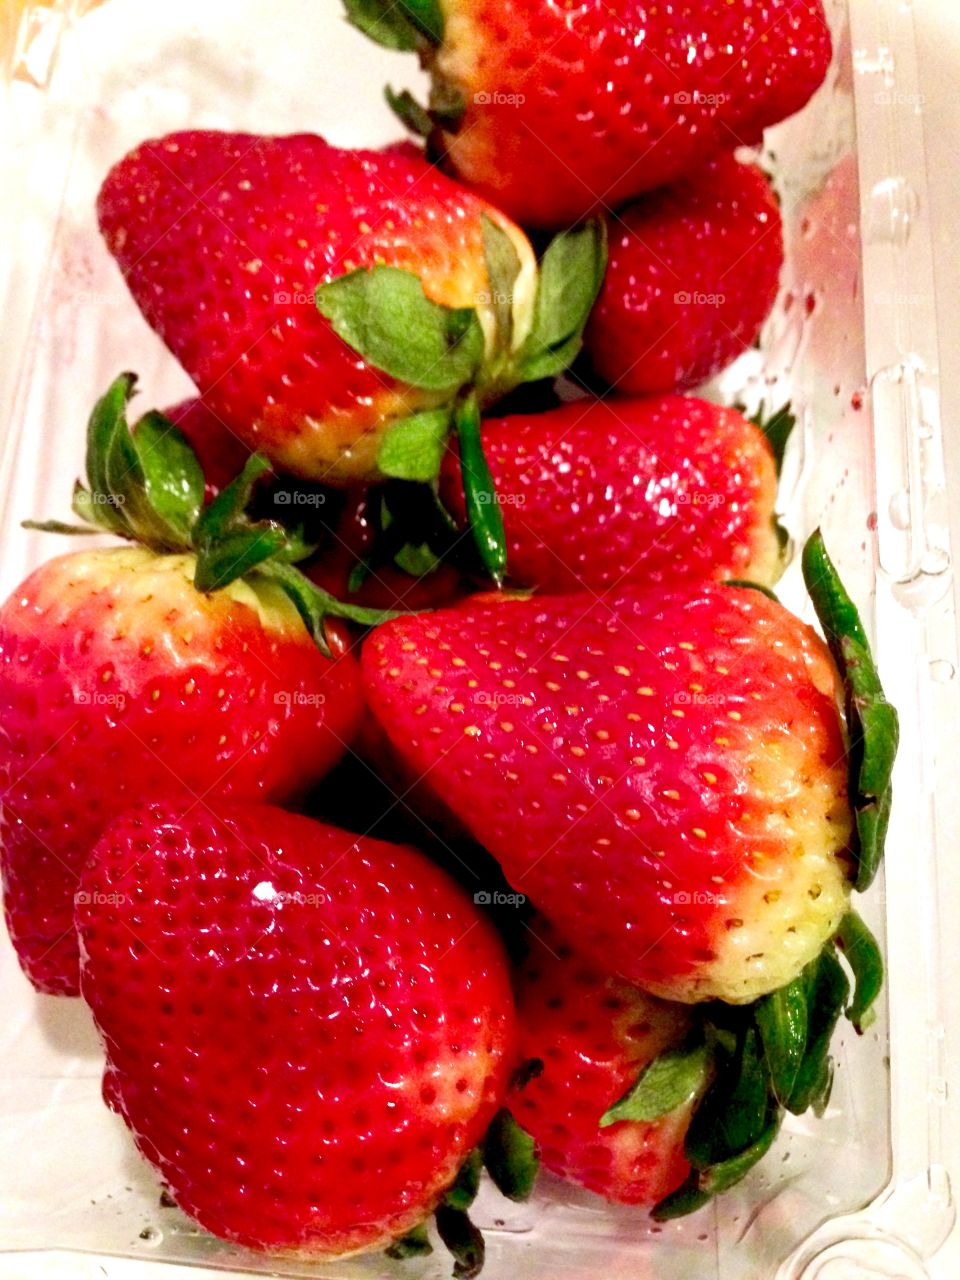 Delicious Strawberries 

Published by:
HappyBrownMonkey 